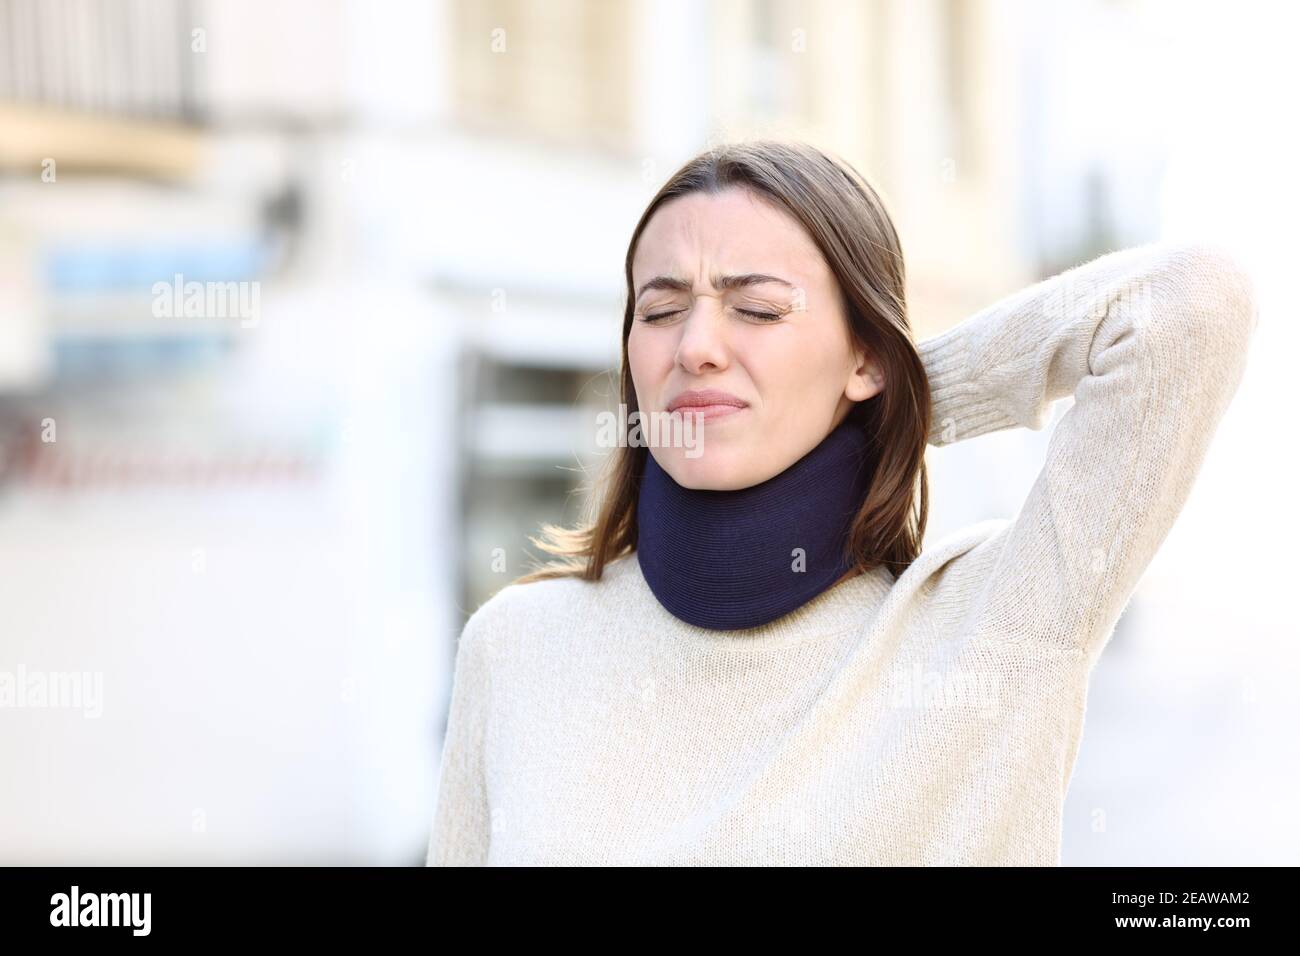 Woman wearing a neck brace suffering cervical ache Stock Photo